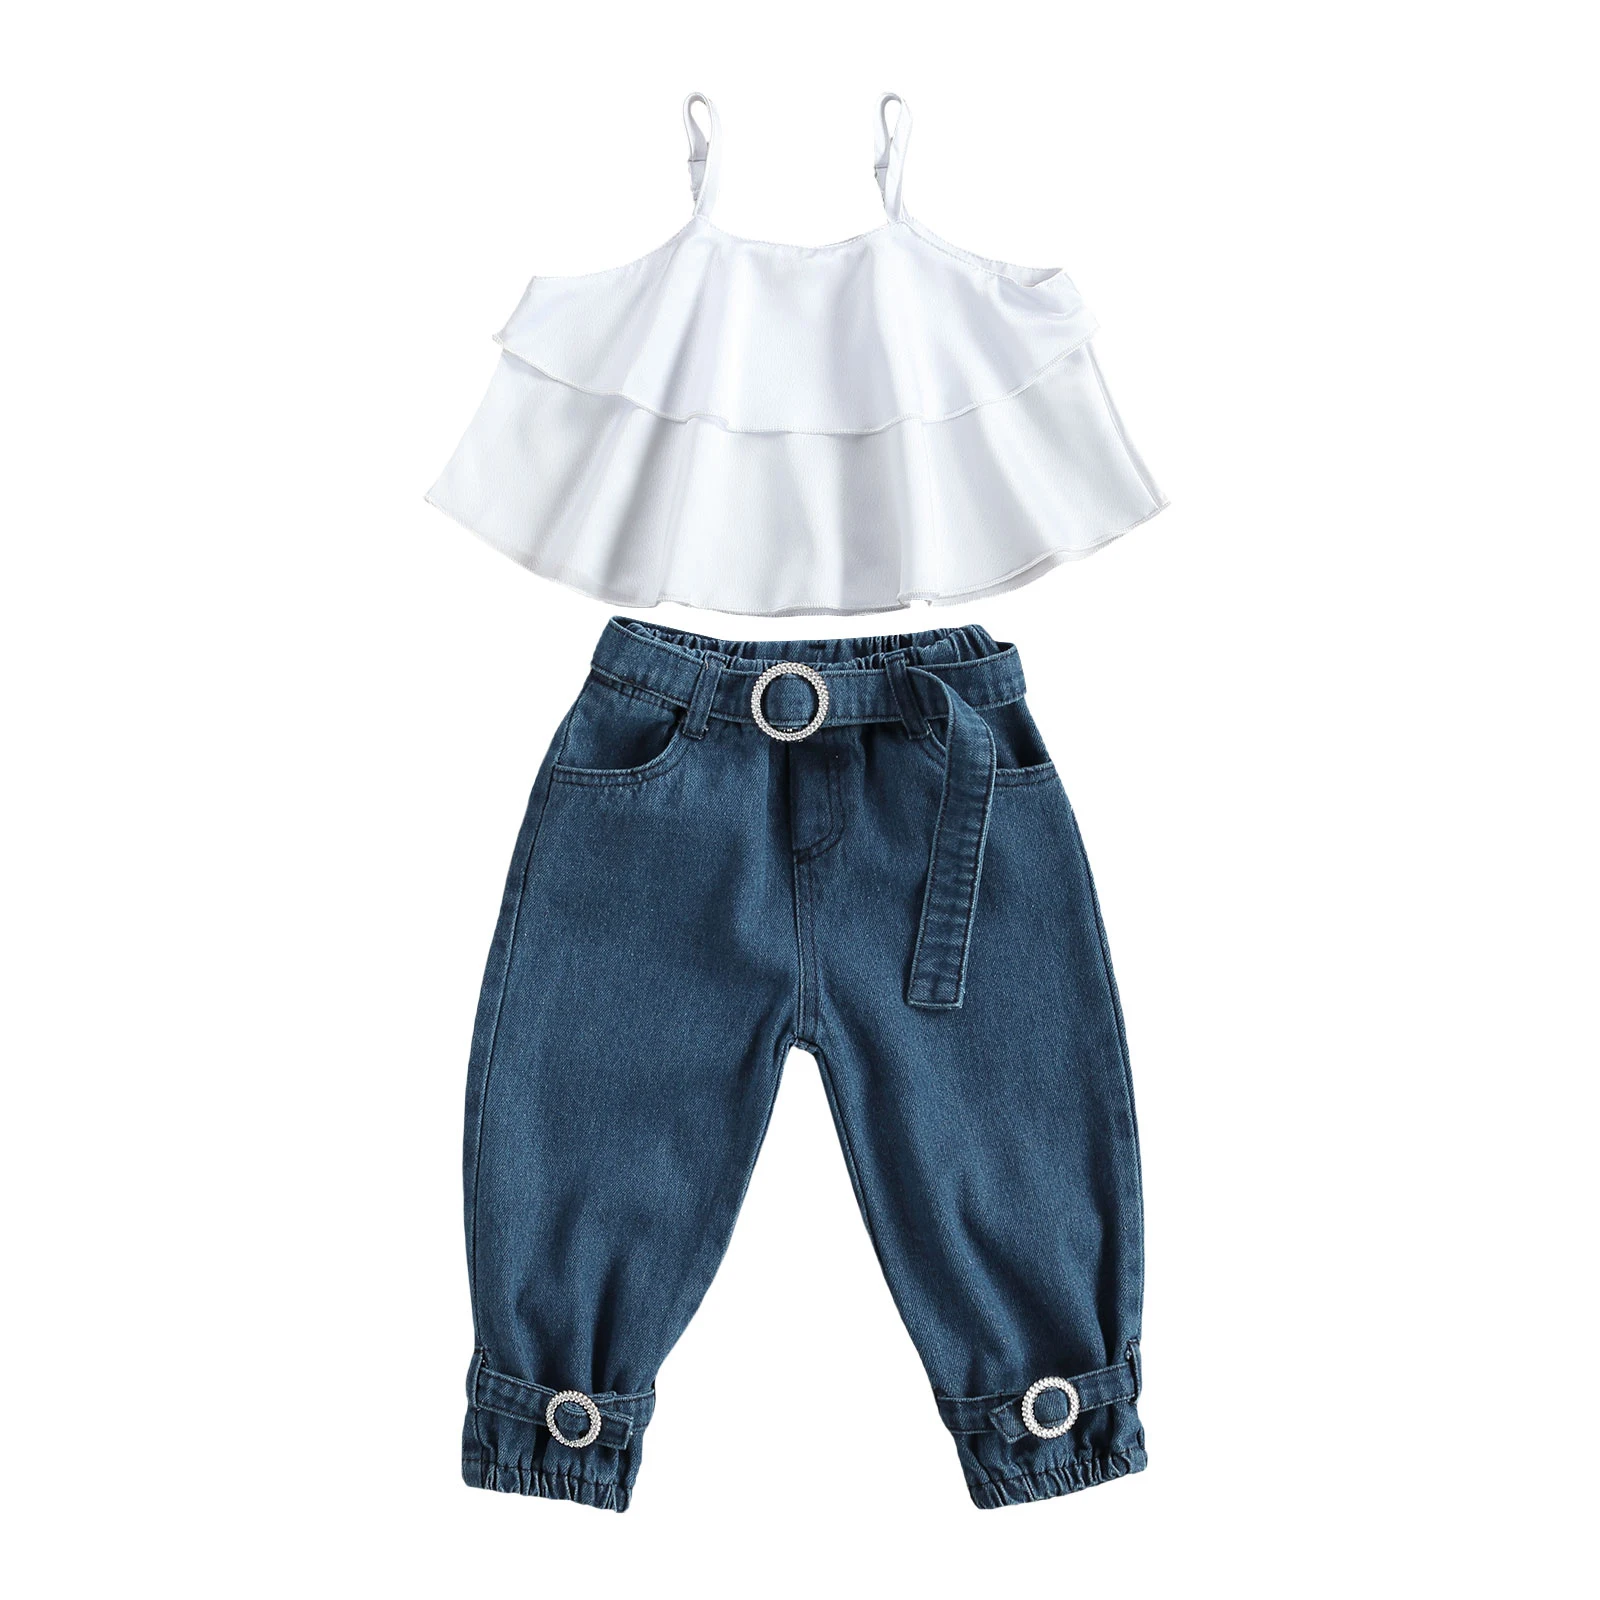 

Toddler Baby Girls Sweet Summer Clothes Sets Spaghetti Straps Layered Ruffle Tank Tops And Denim Long Pants With Belt 18M-6T